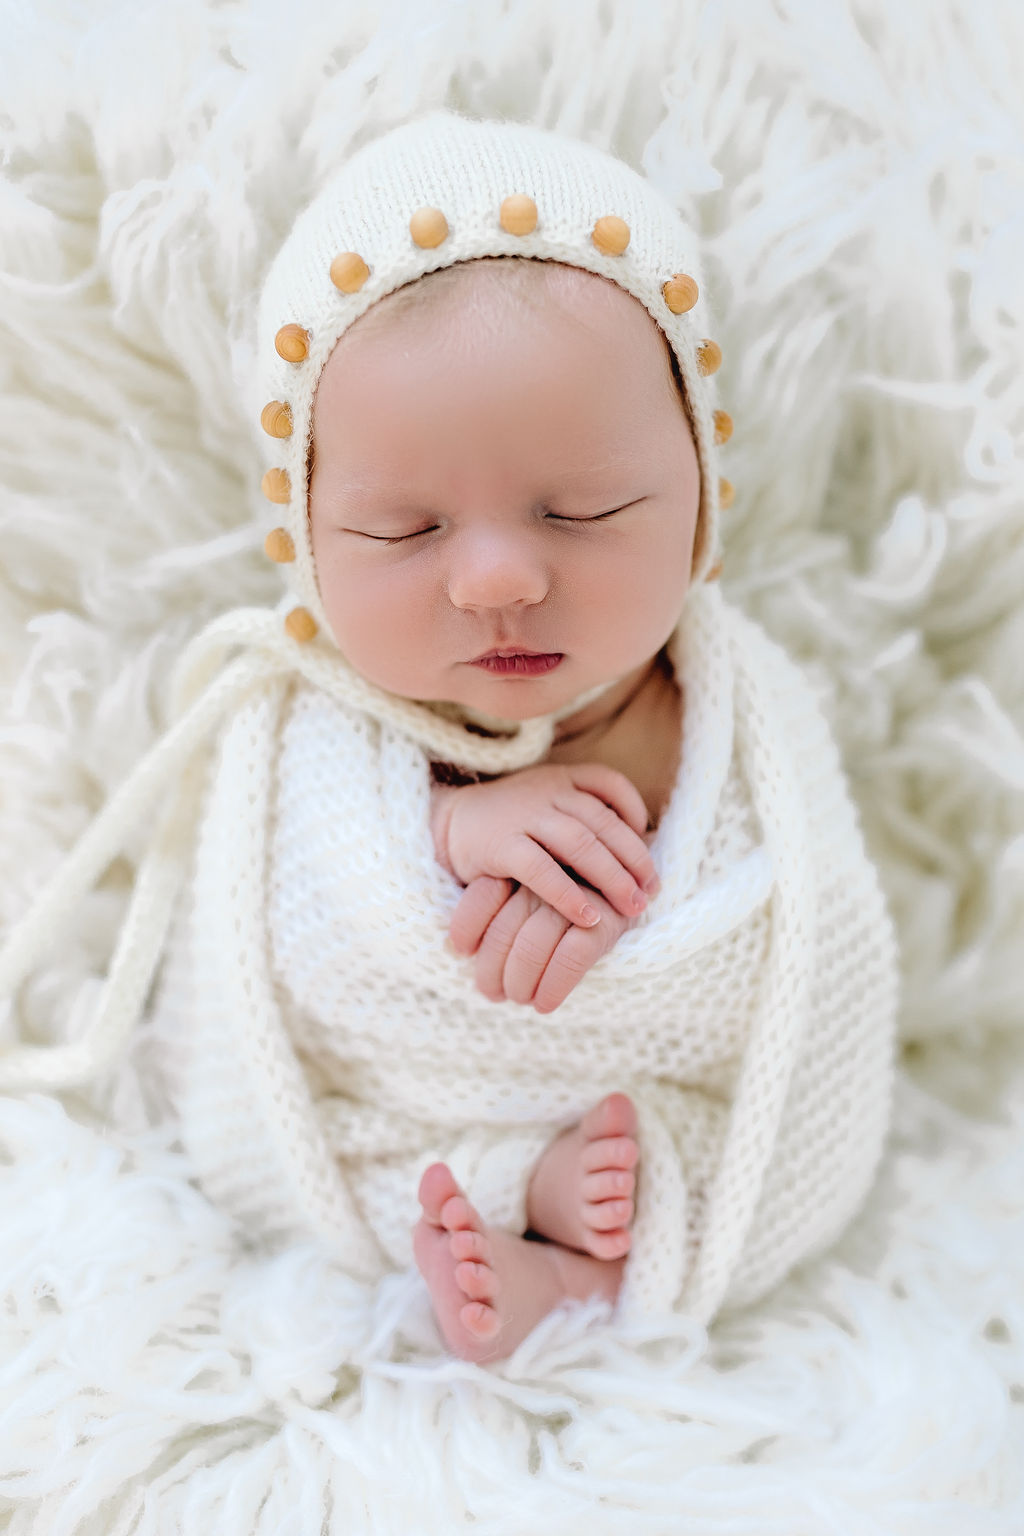 newborn swaddled in a knit blanket and hat sleeps on a fur blanket